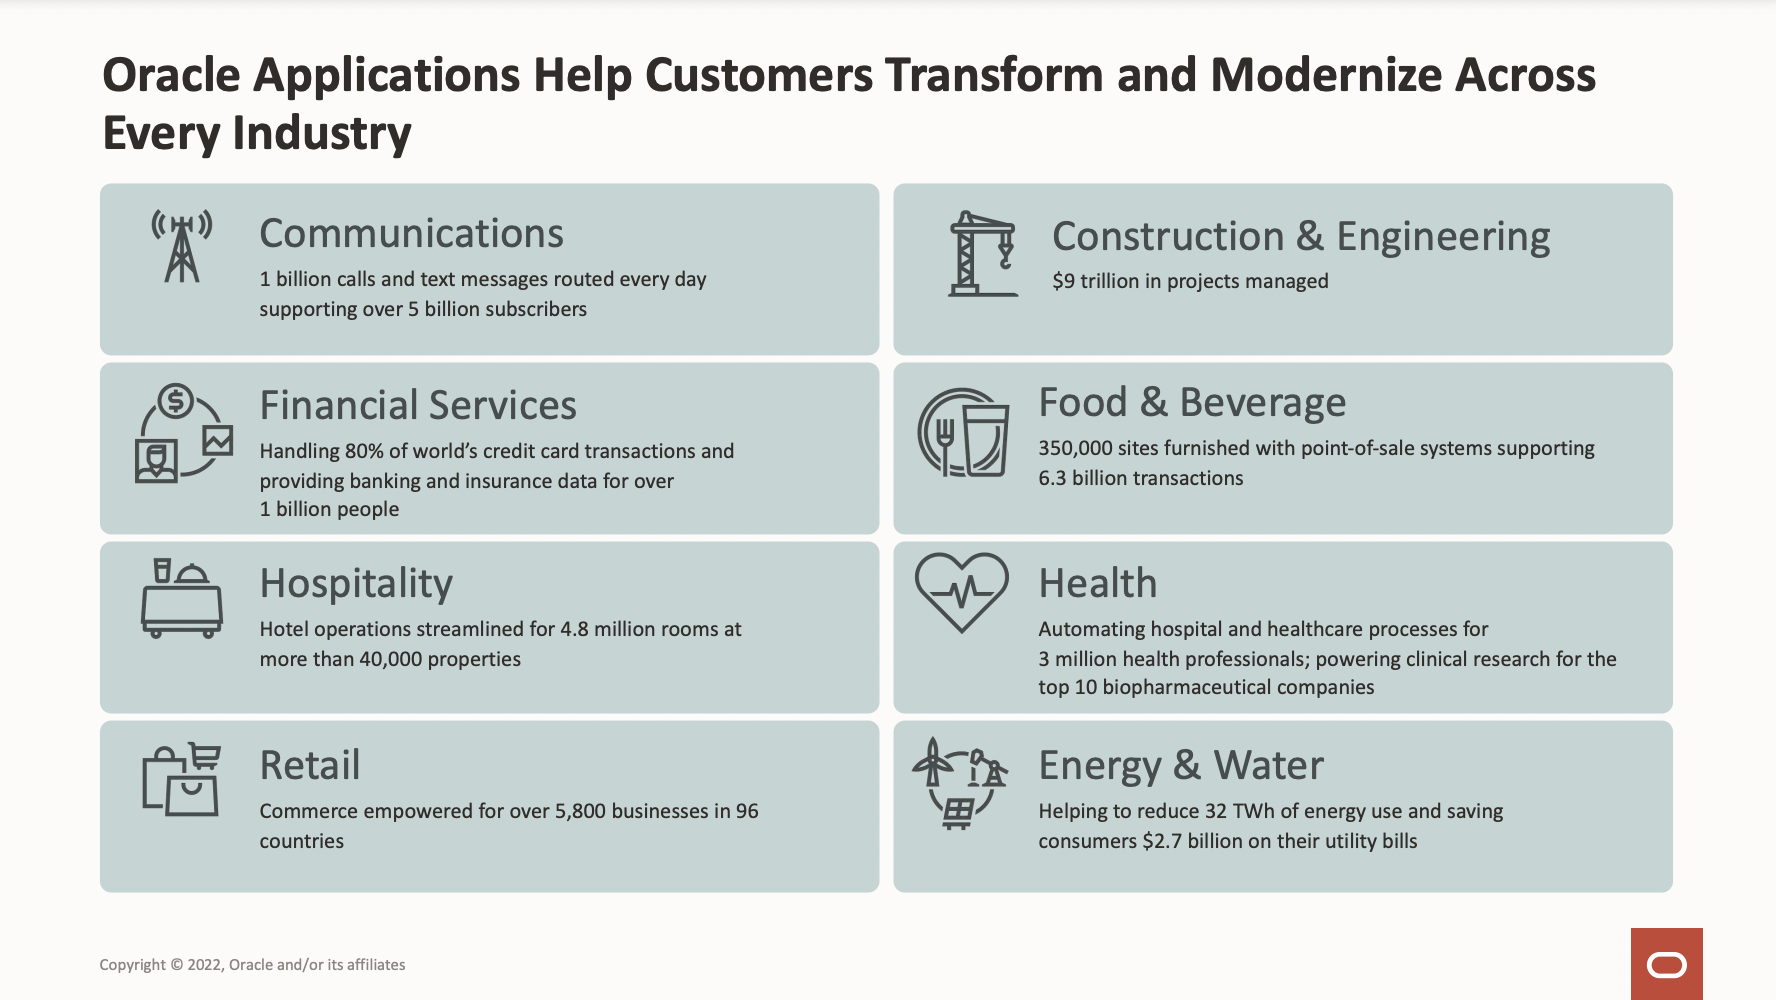 Oracle Applications Help Customers Transform and Modernize Across Every Industry